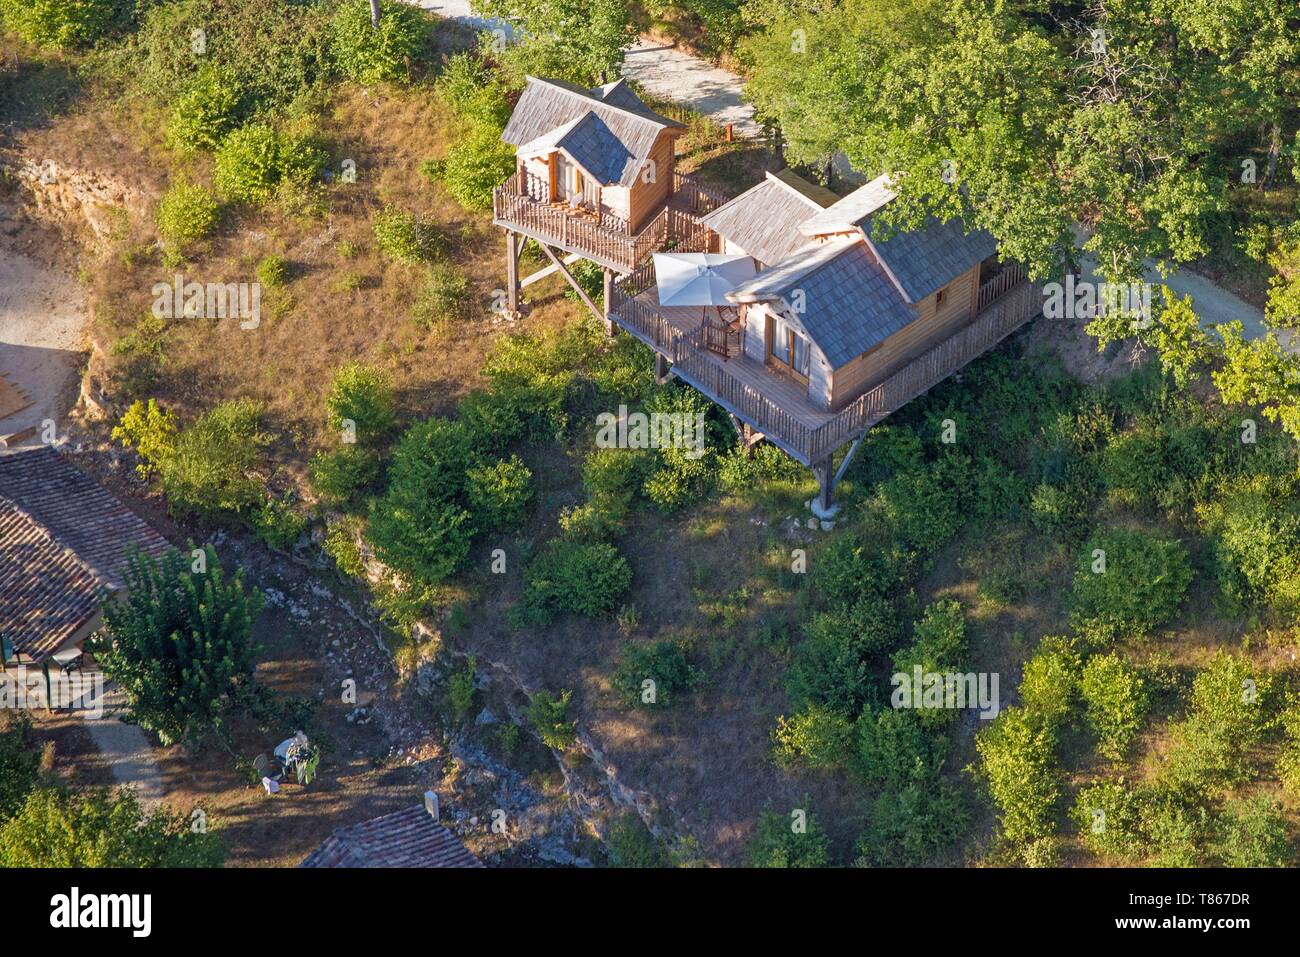 France, Dordogne, Beaumont du Perigord, wooden hut in a campsite (camping), unusual accommodations (hostings) References (aerial view) Stock Photo